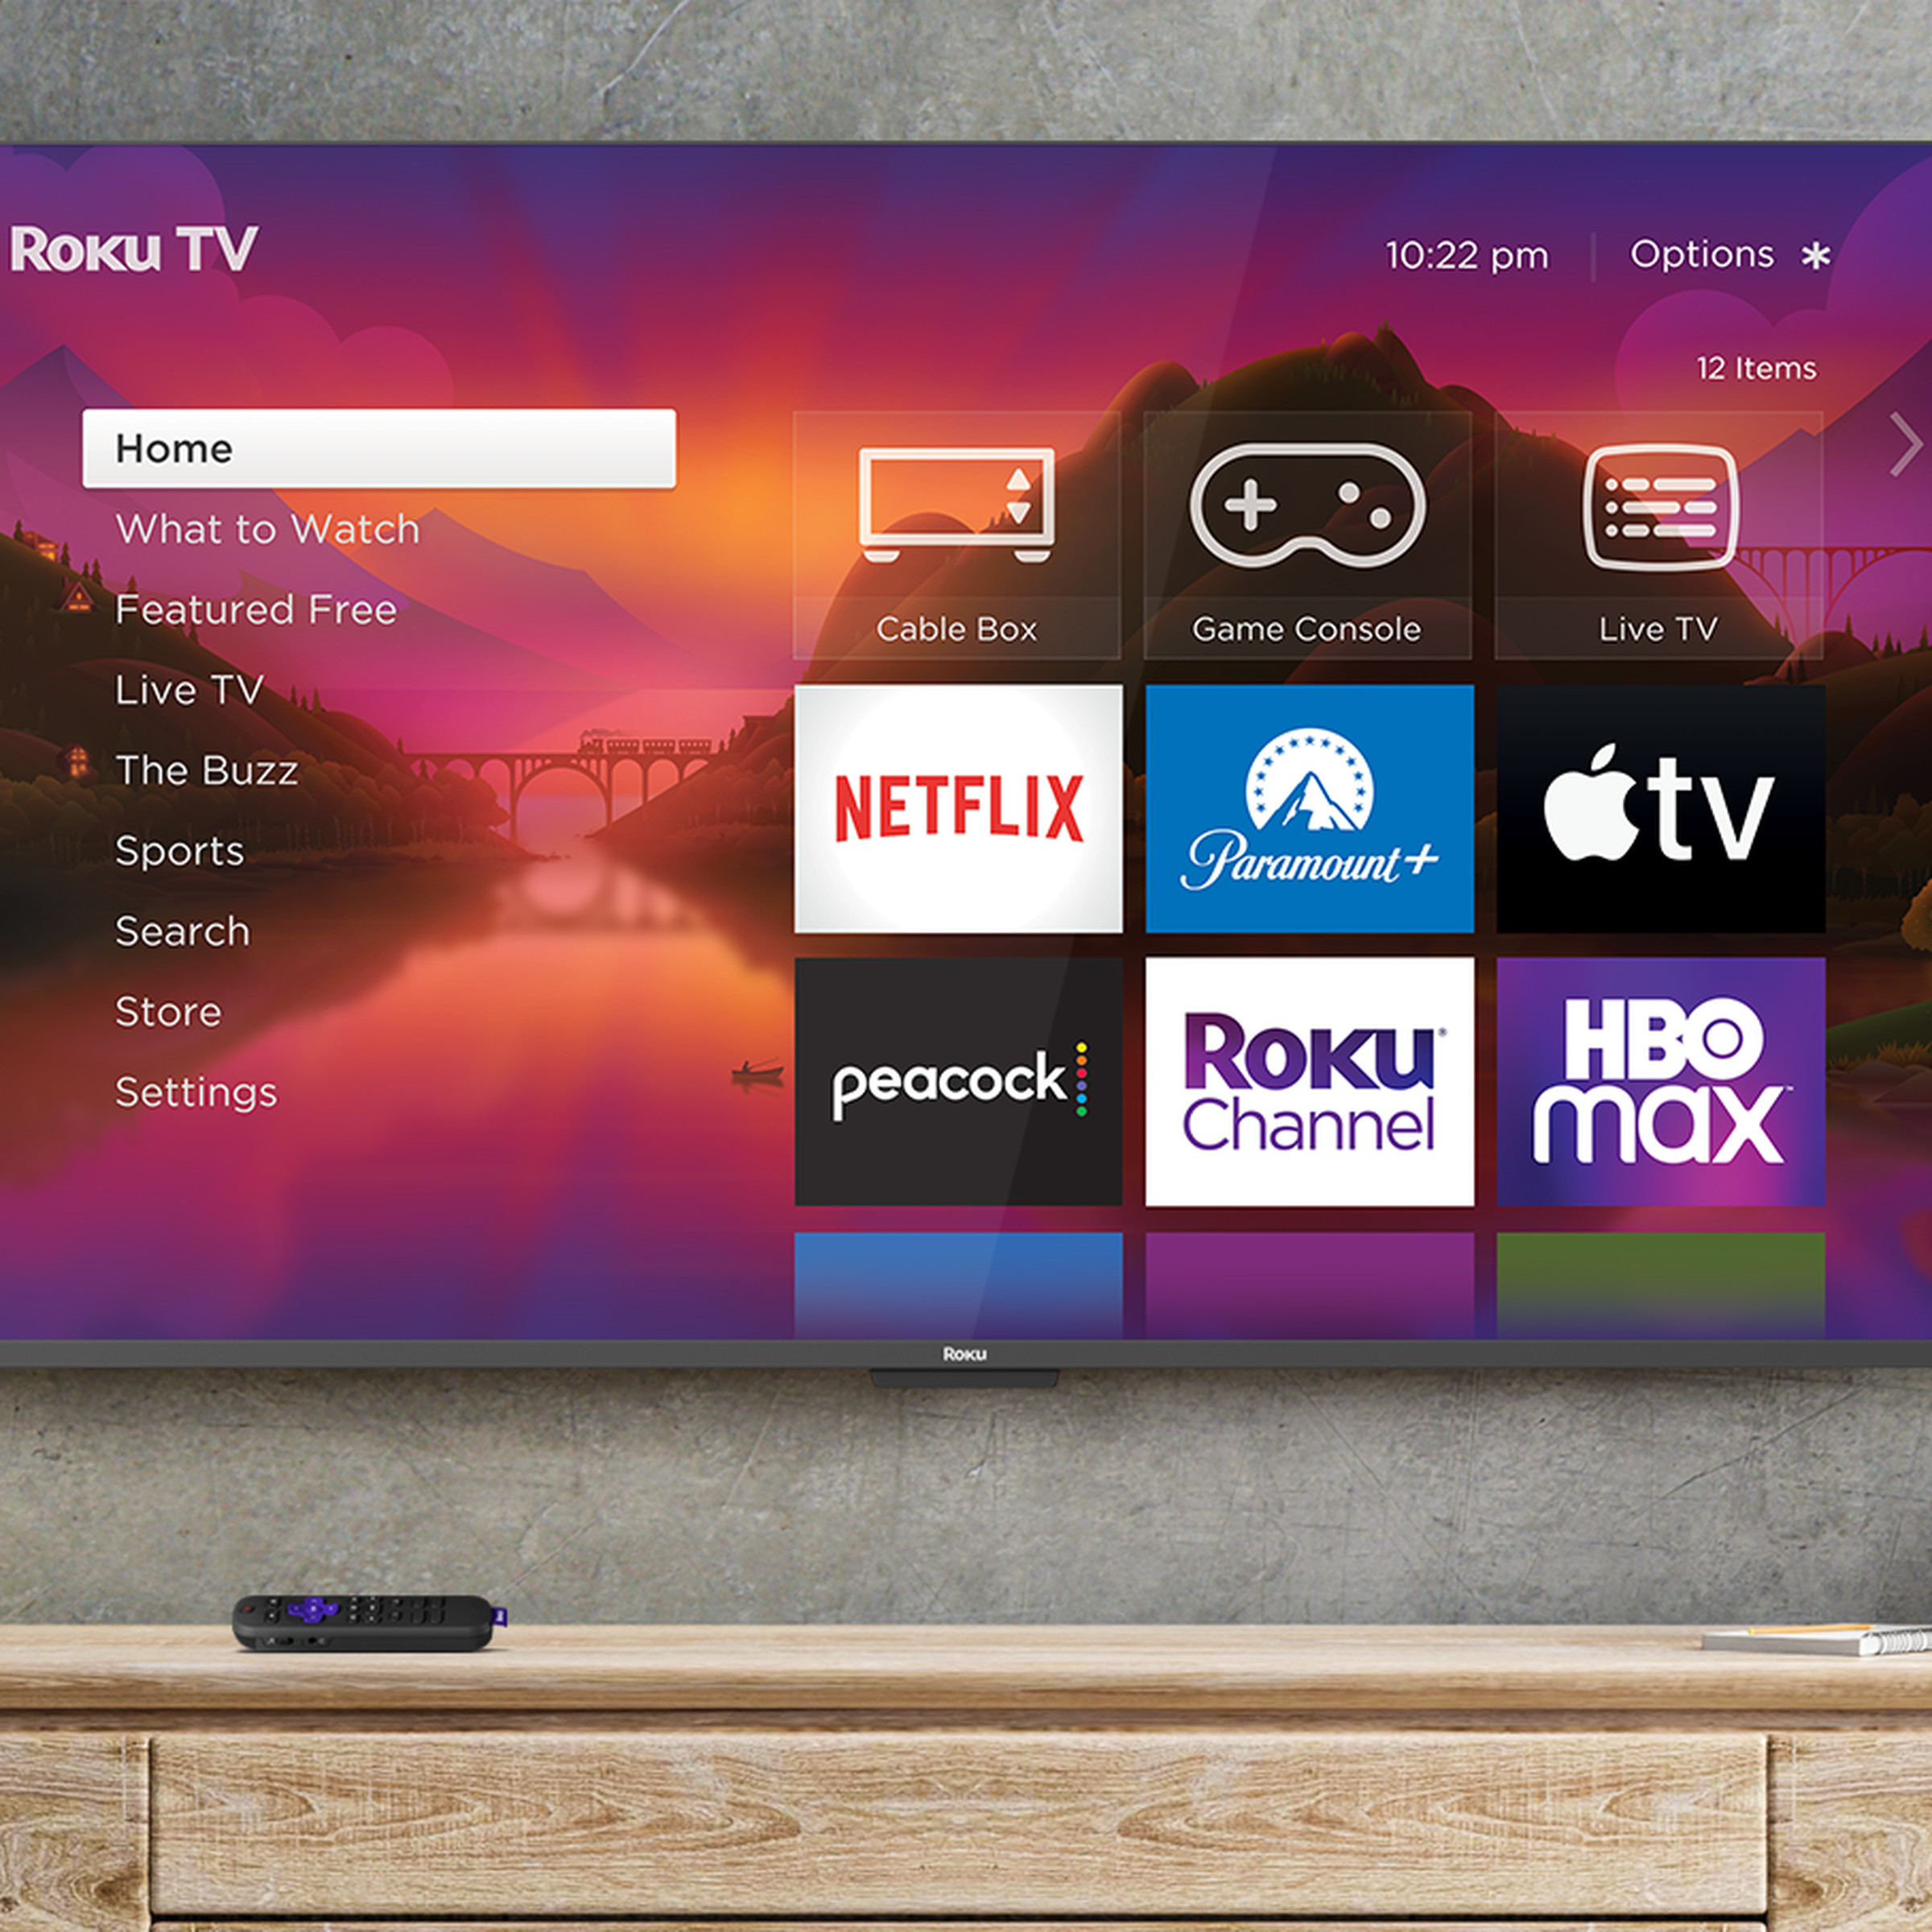 An image of a Roku TV announced at CES 2023.